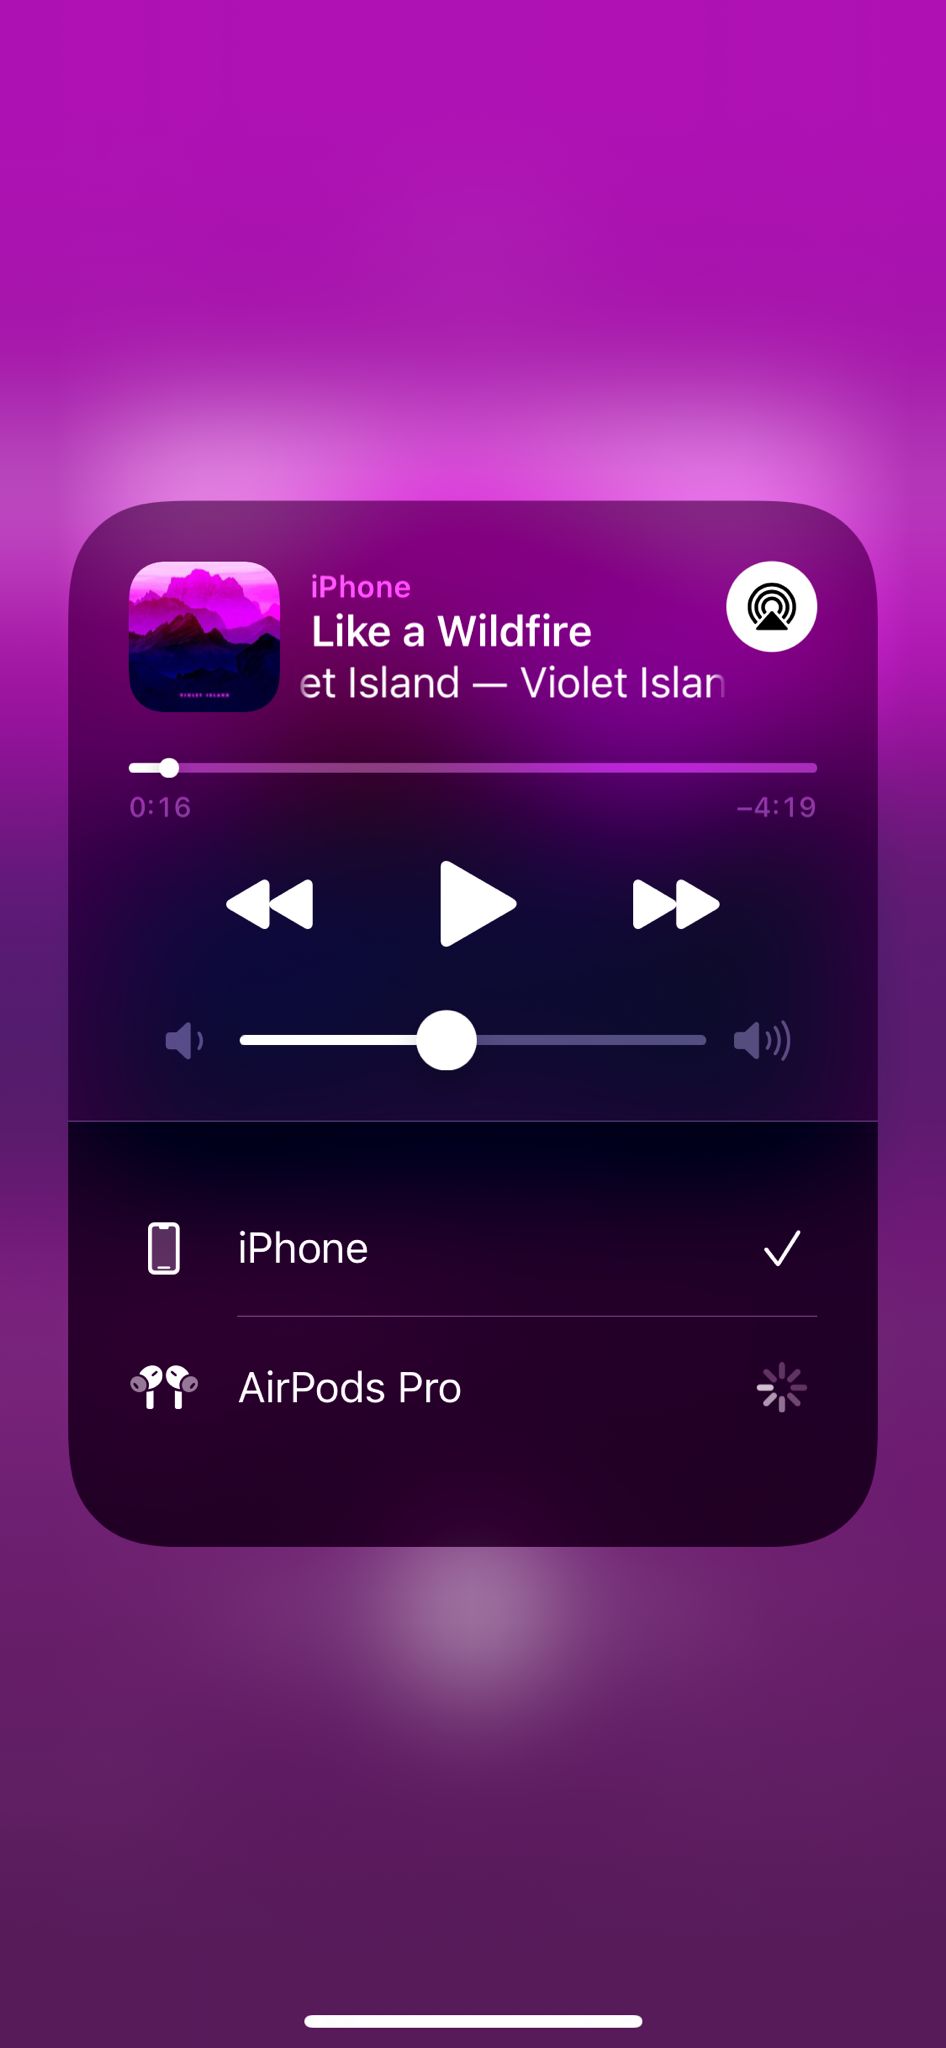 Connect your AirPods and AirPods Pro to your iPhone - Apple